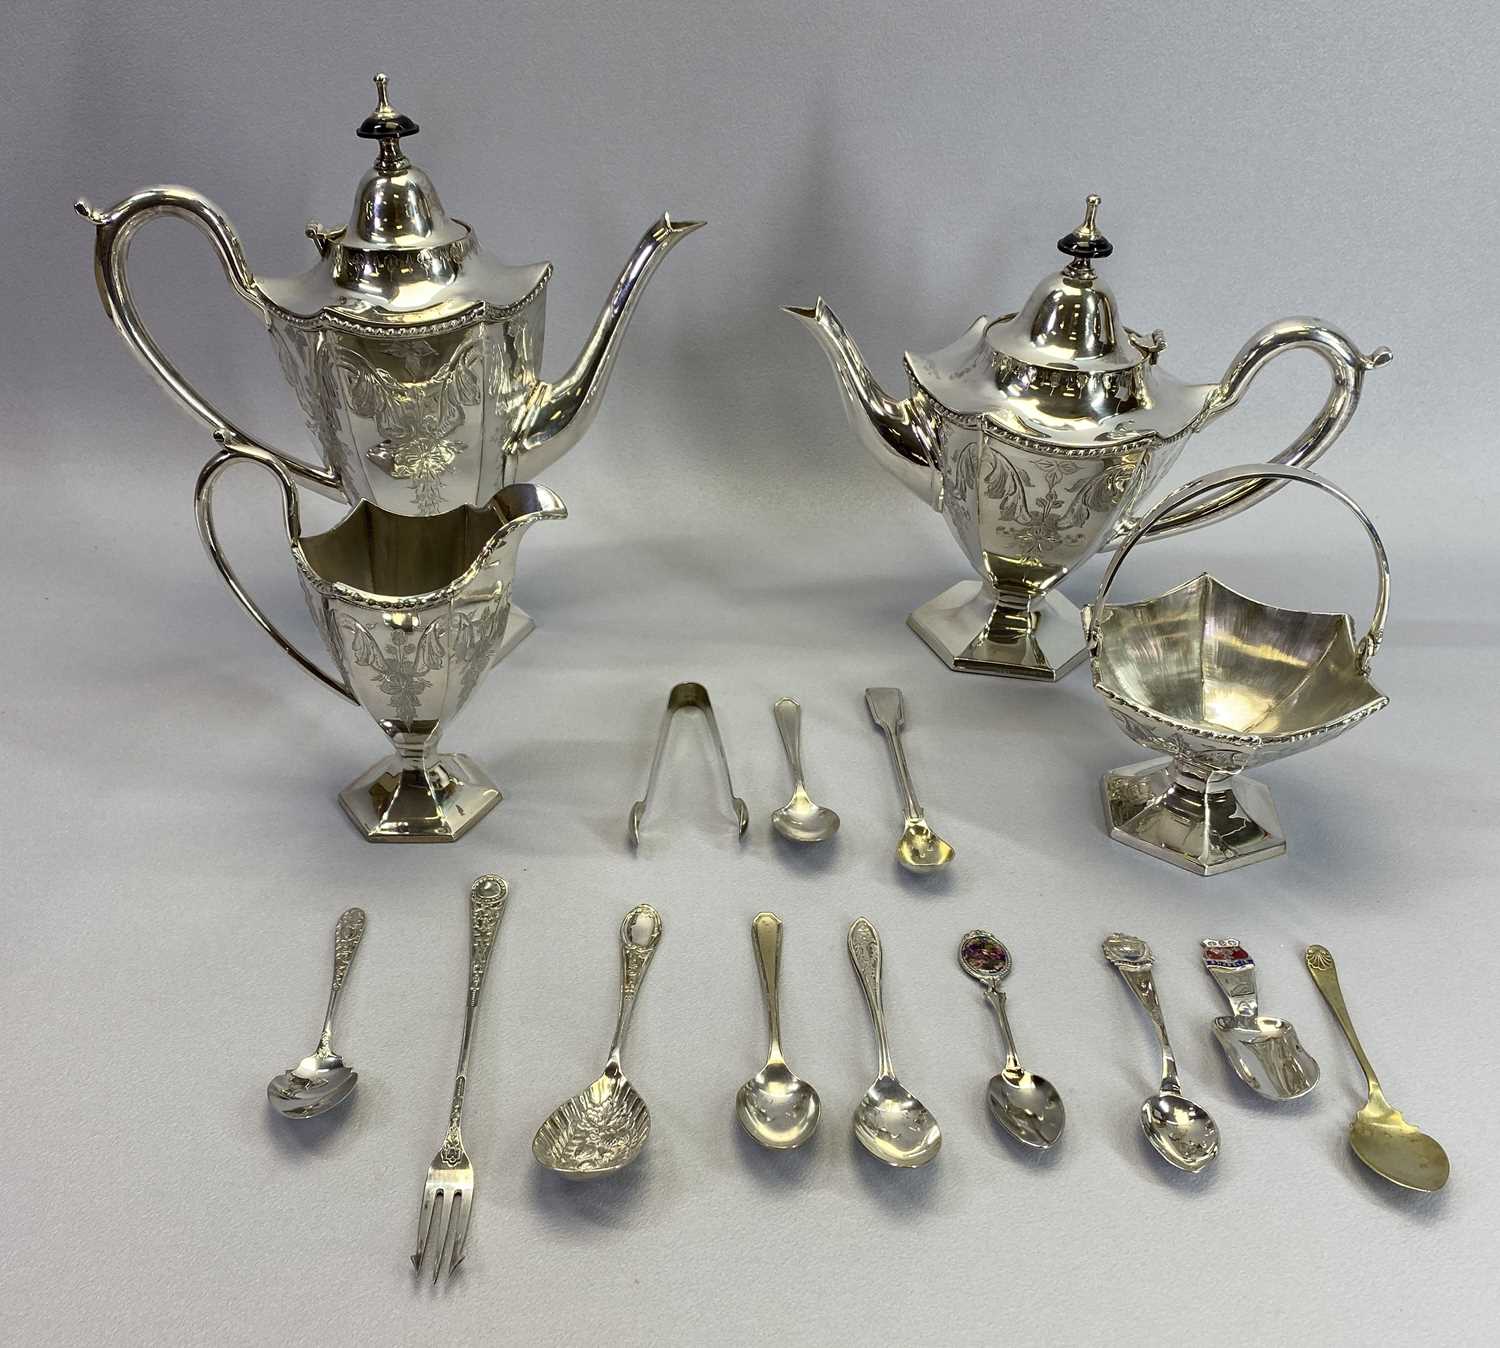 FOUR PIECE NEO CLASSICAL STYLE TEA & COFFEE SERVICE along with one Sheffield silver teaspoon and a